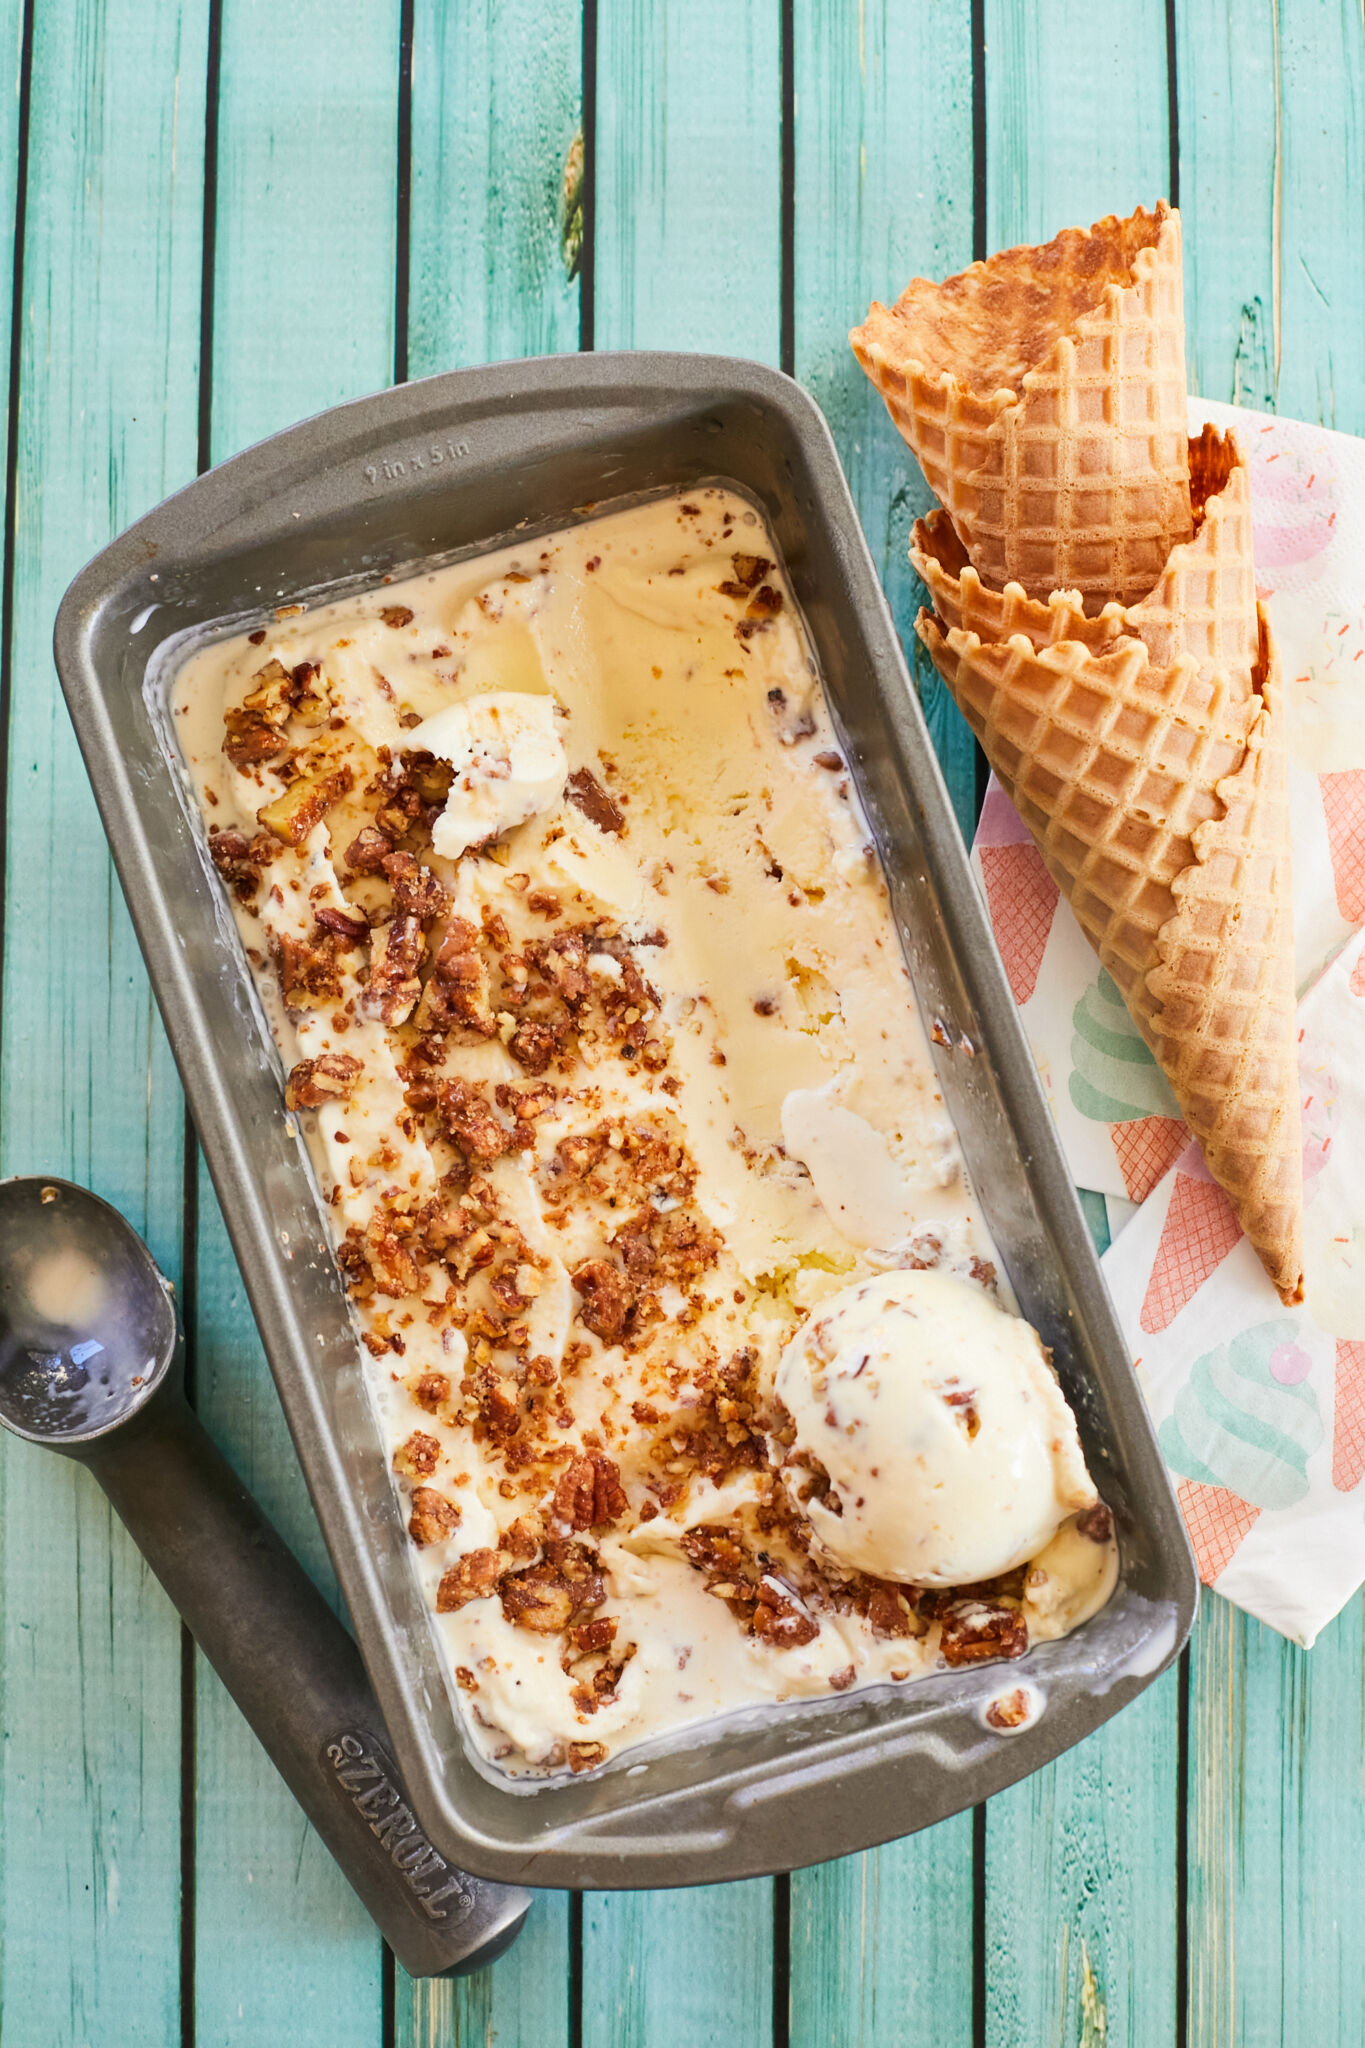 Extra smooth pecan gelato in a metal loaf pan, with crunchy toasted nuts on top and mixed through out. One ball is scooped on the right side in the pan. The scoop is on the let side and ice cream cones are on the right side outside the pan. 